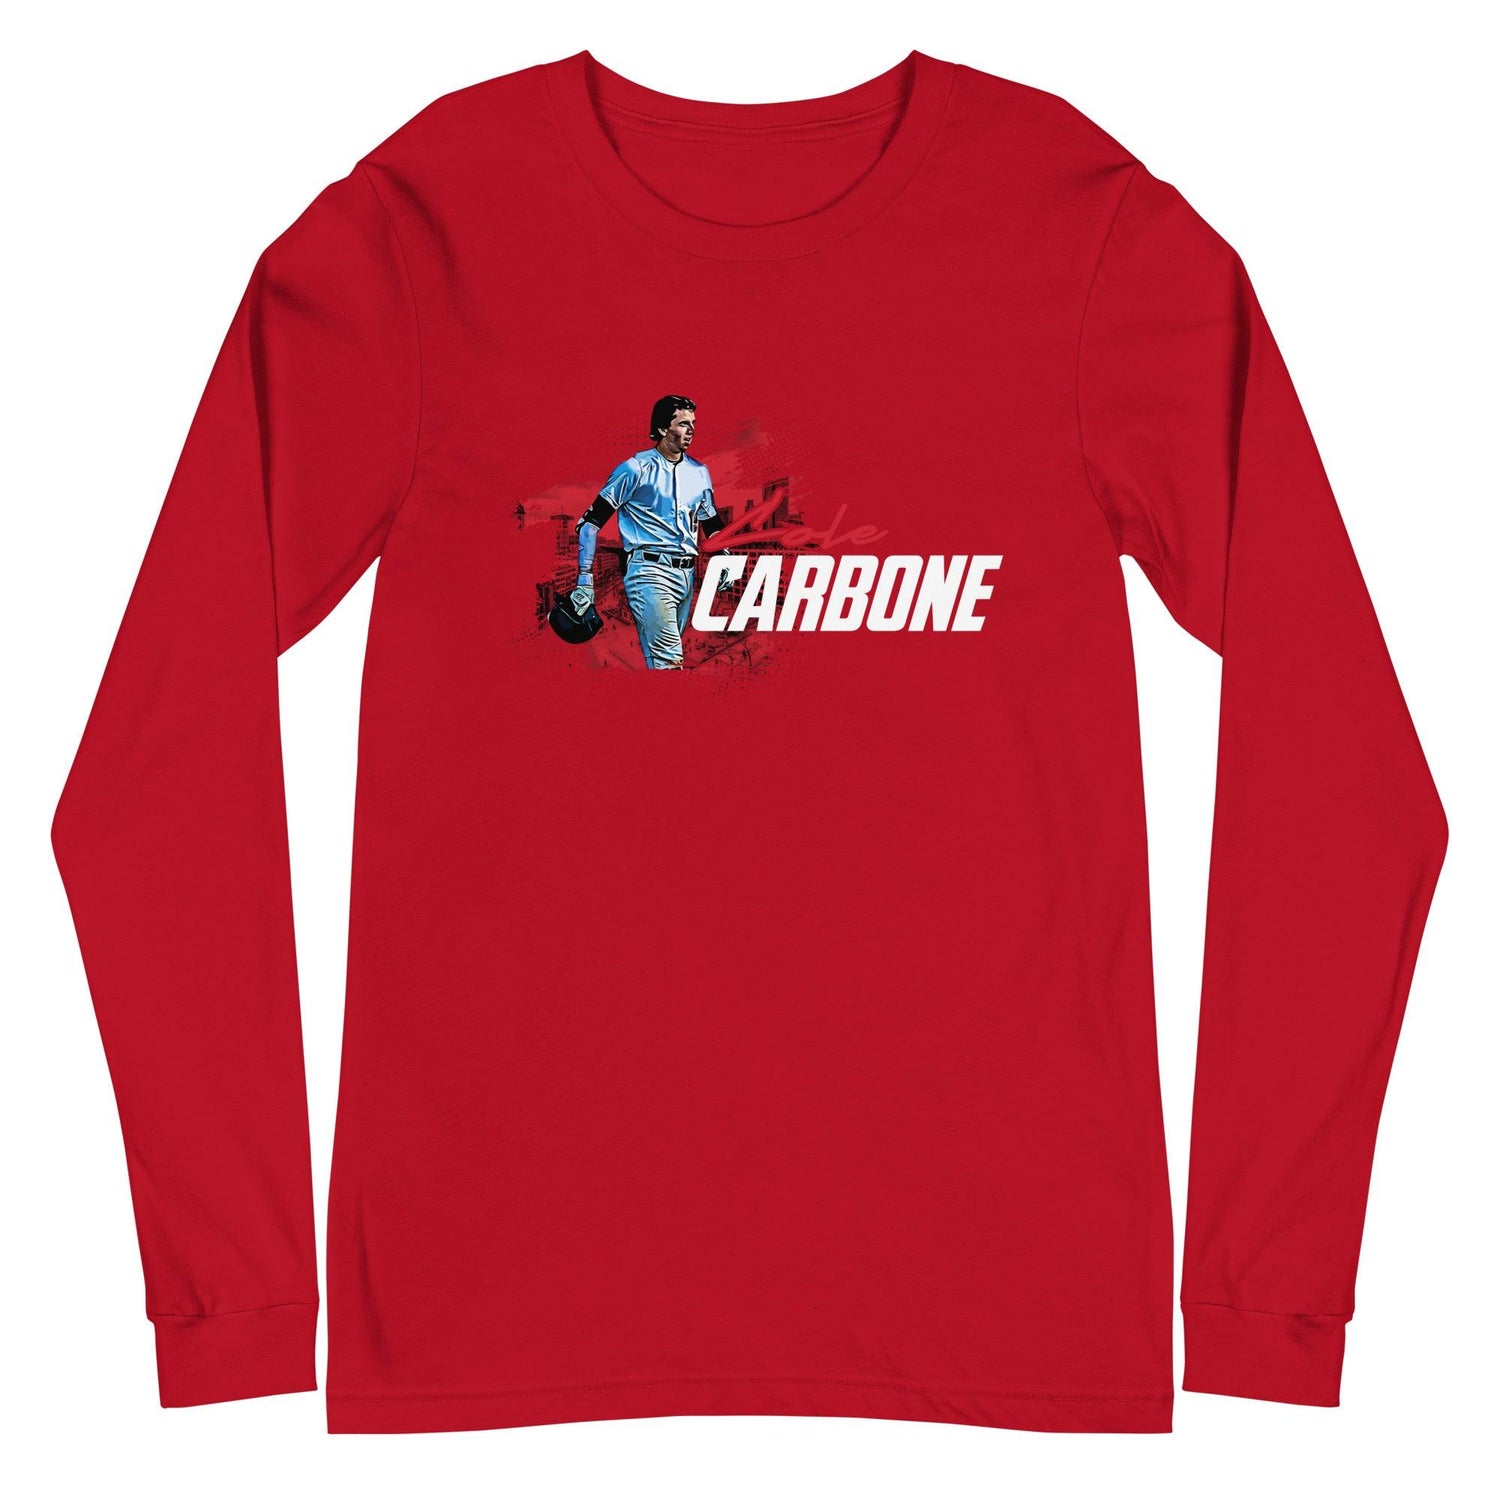 Cole Carbone "Gameday" Long Sleeve Tee - Fan Arch